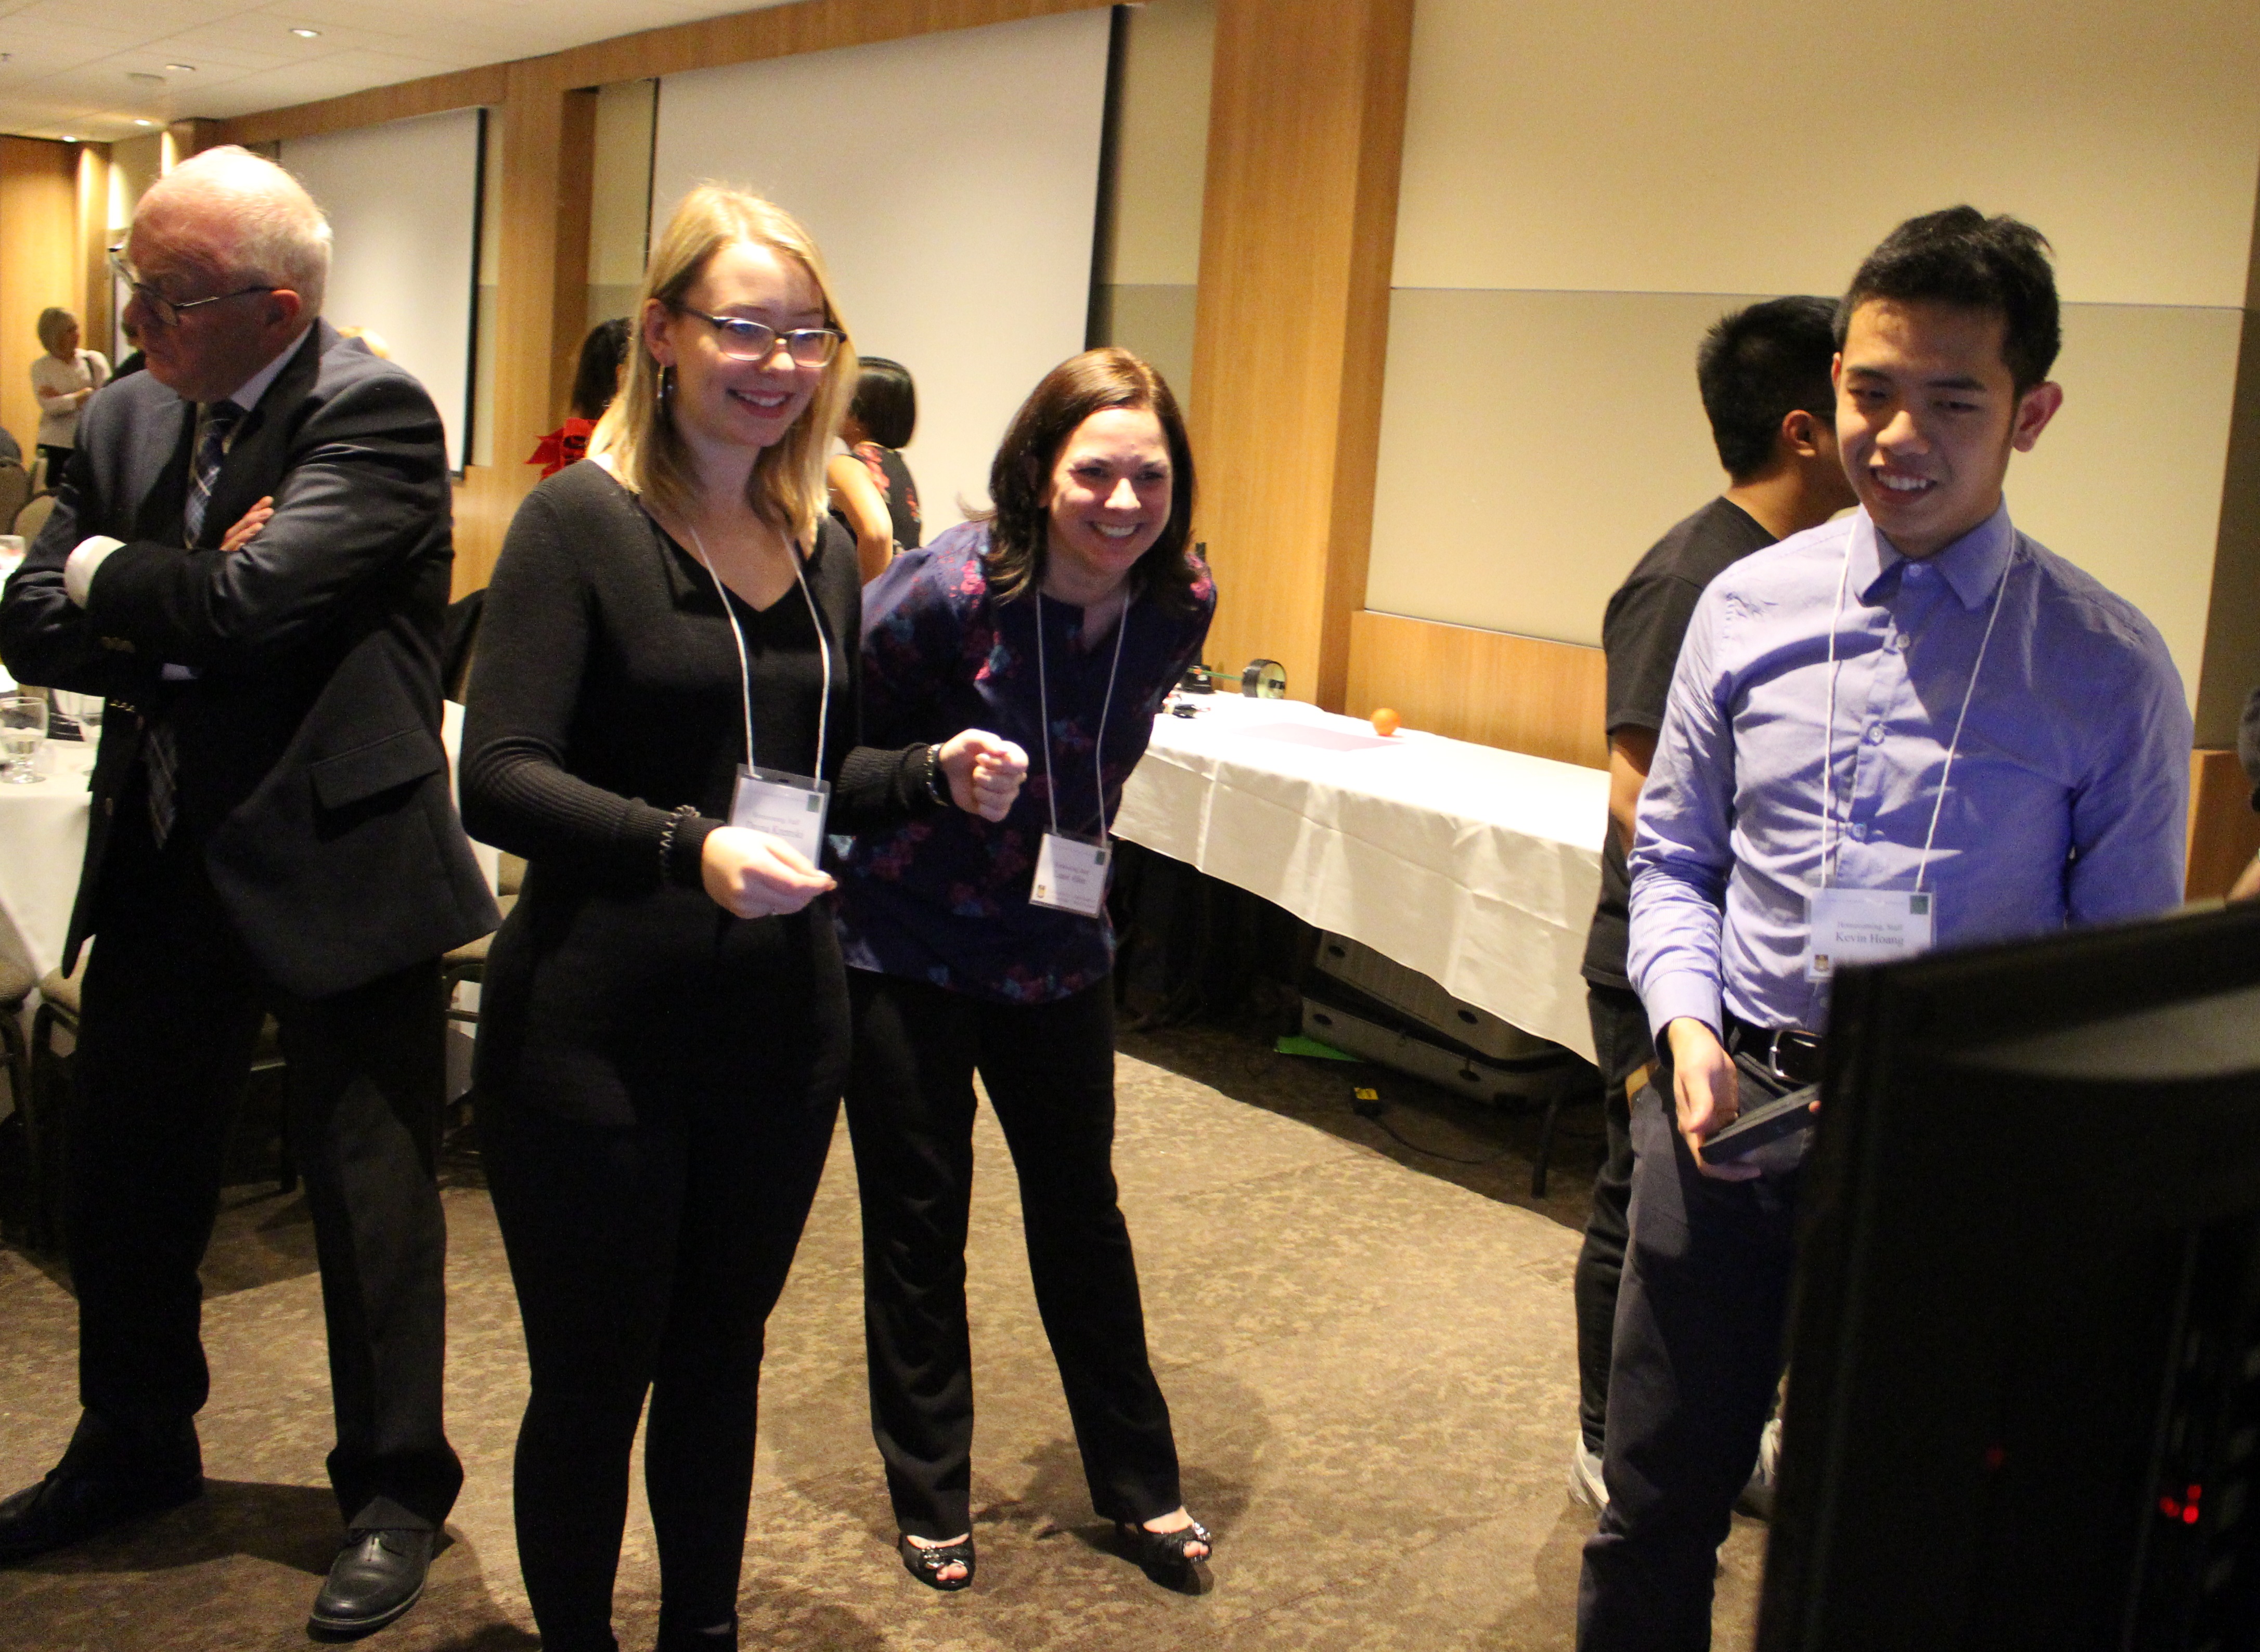 COMPUTER SCIENCES STUDENT KEVIN HOANG DEMONSTRATES SAEBOVR SYSTEM TO ATTENDEES